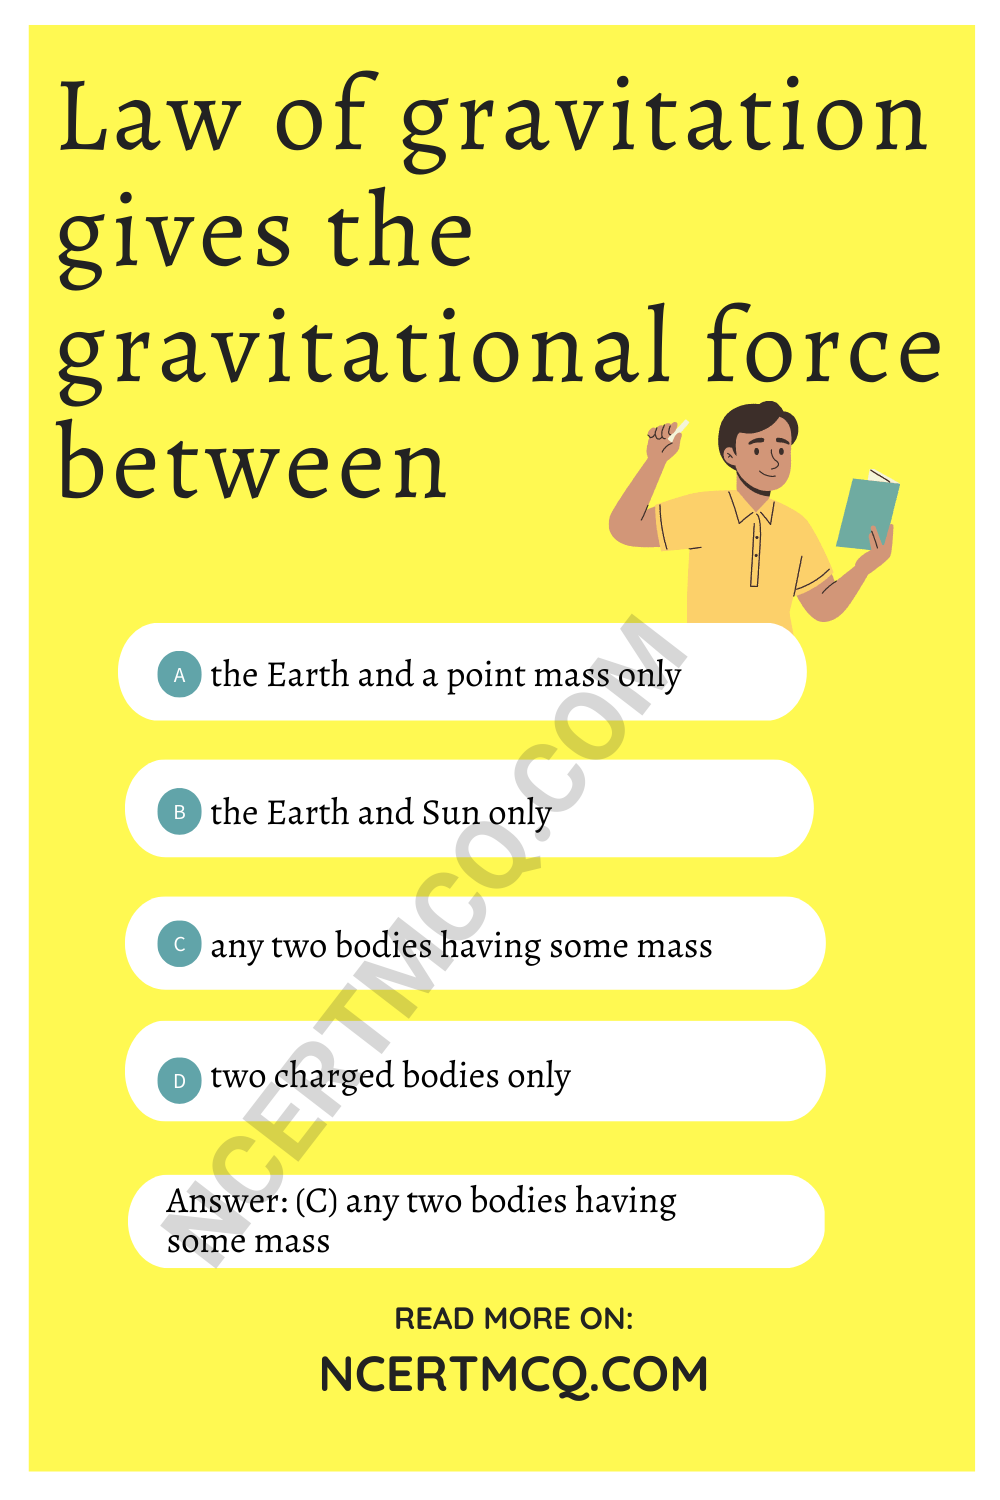 Law of gravitation gives the gravitational force between